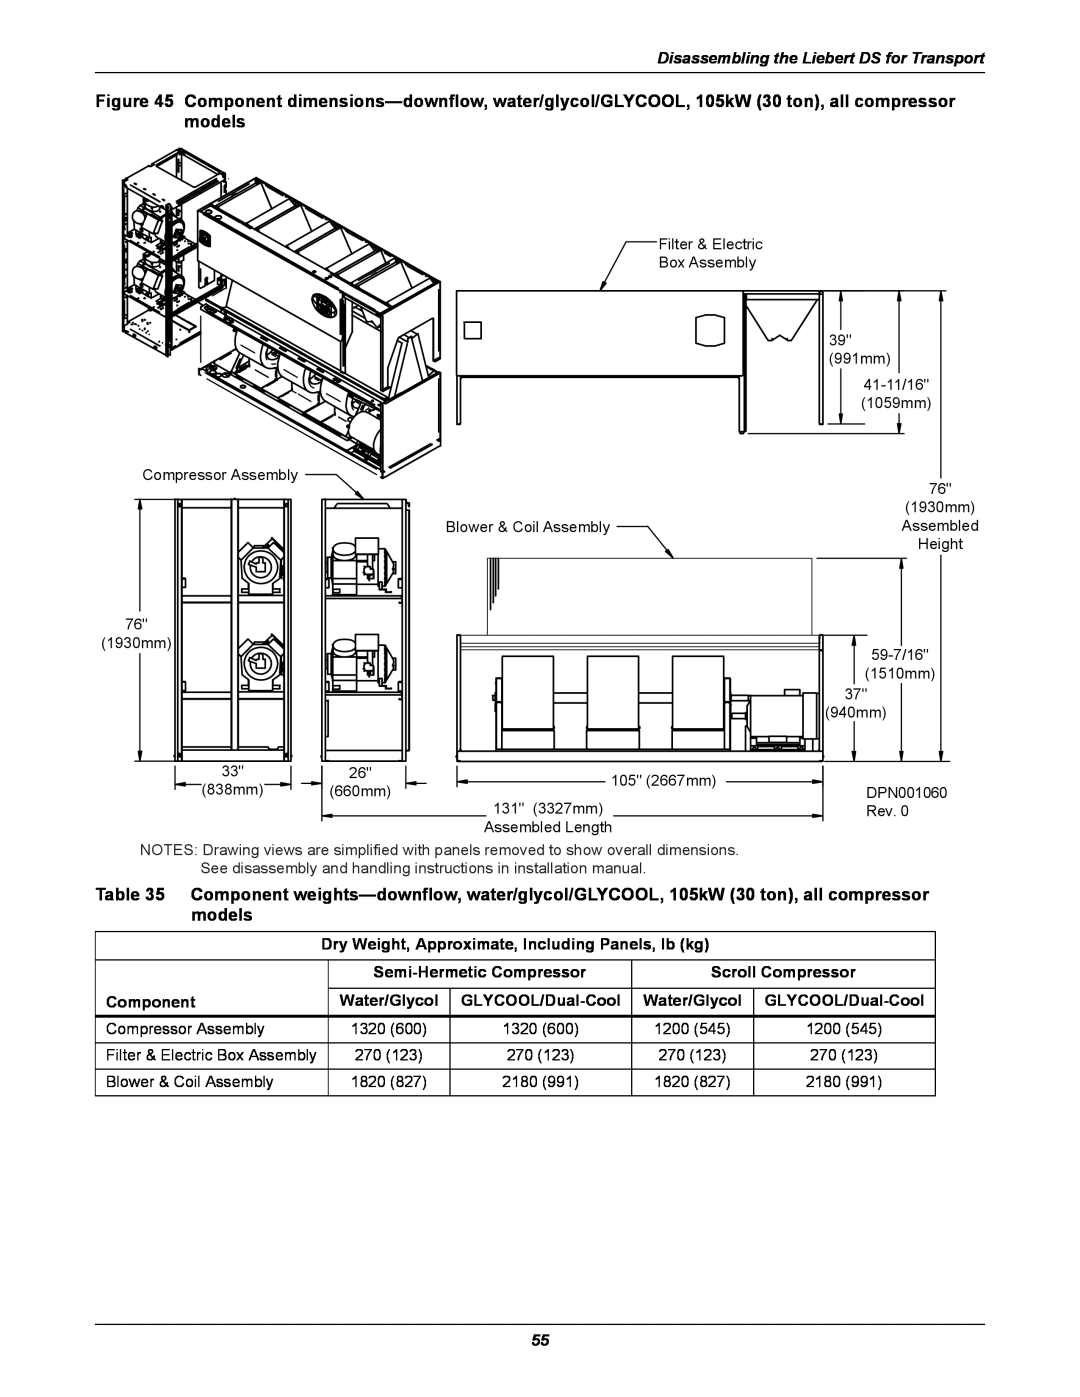 Liebert DS user manual Component dimensions-downflow, water/glycol/GLYCOOL, 105kW 30 ton, all compressor models 